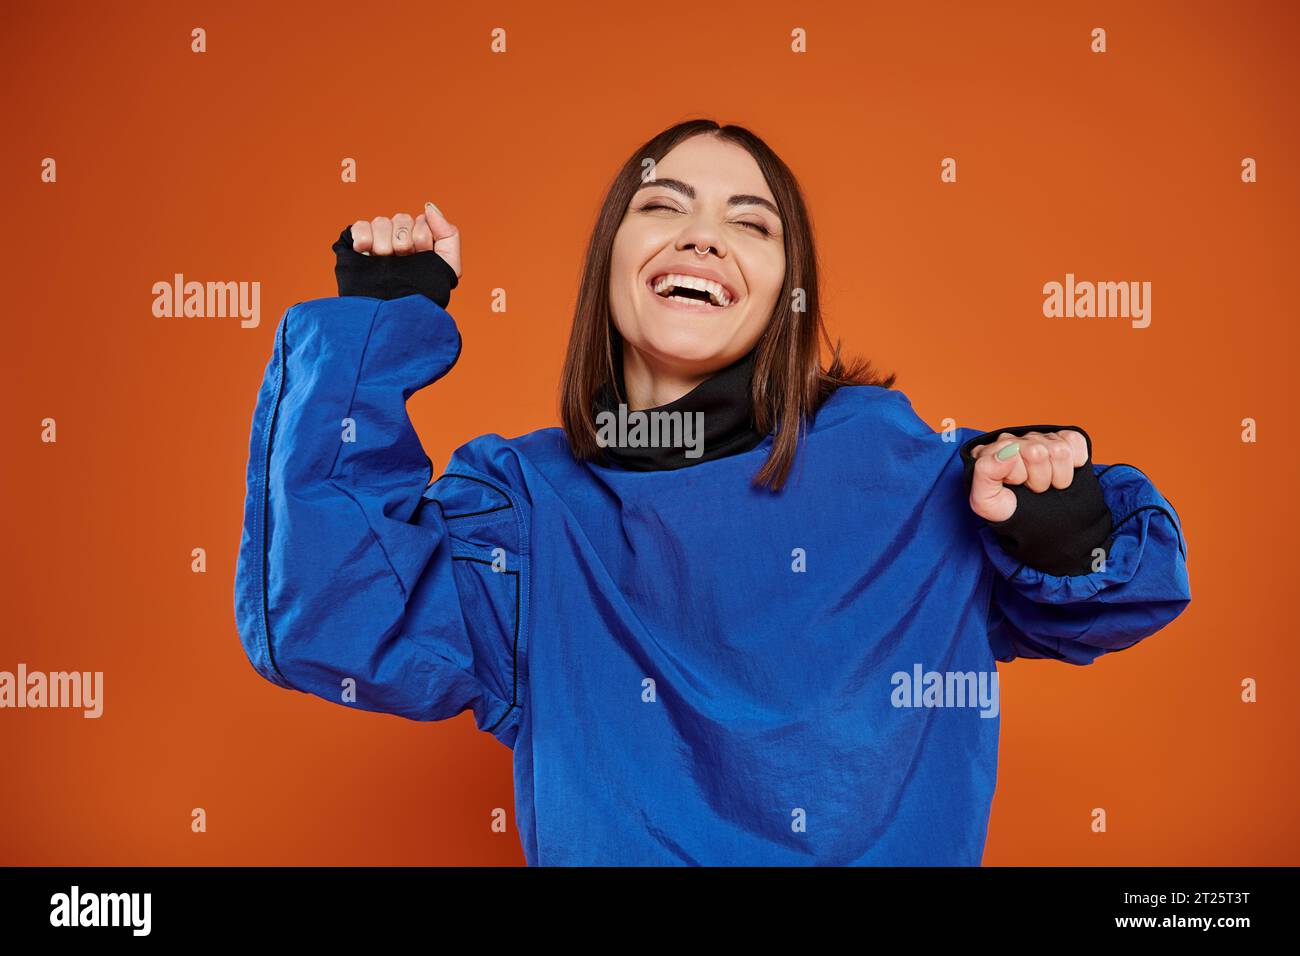 excited young woman with pierced nose gesturing and smiling on orange backdrop, blue sweatshirt Stock Photo